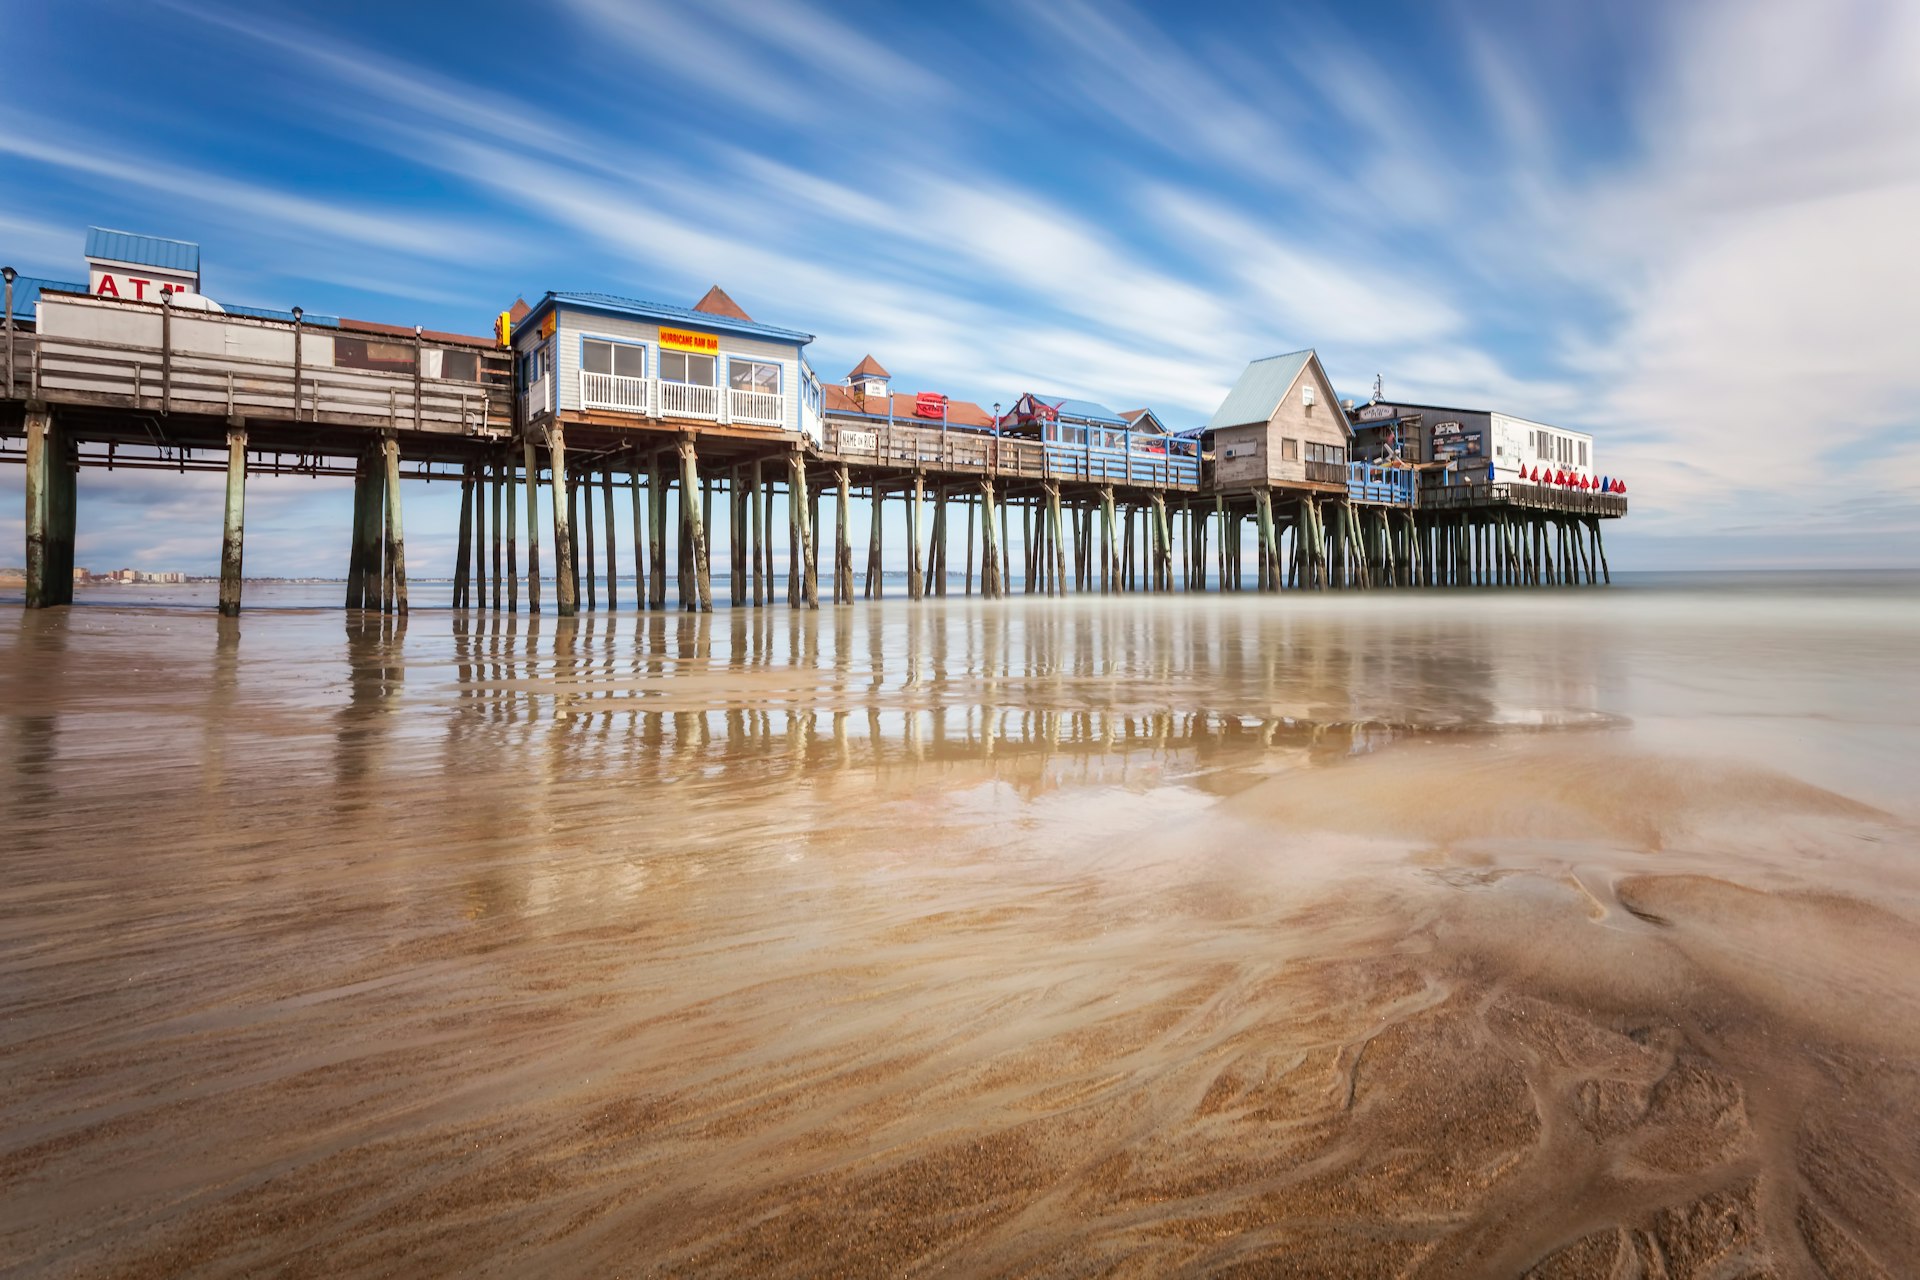 The Pier at Old Orchard Beach, Maine. Long exposure during the day, showing motion of the cloudy sky.